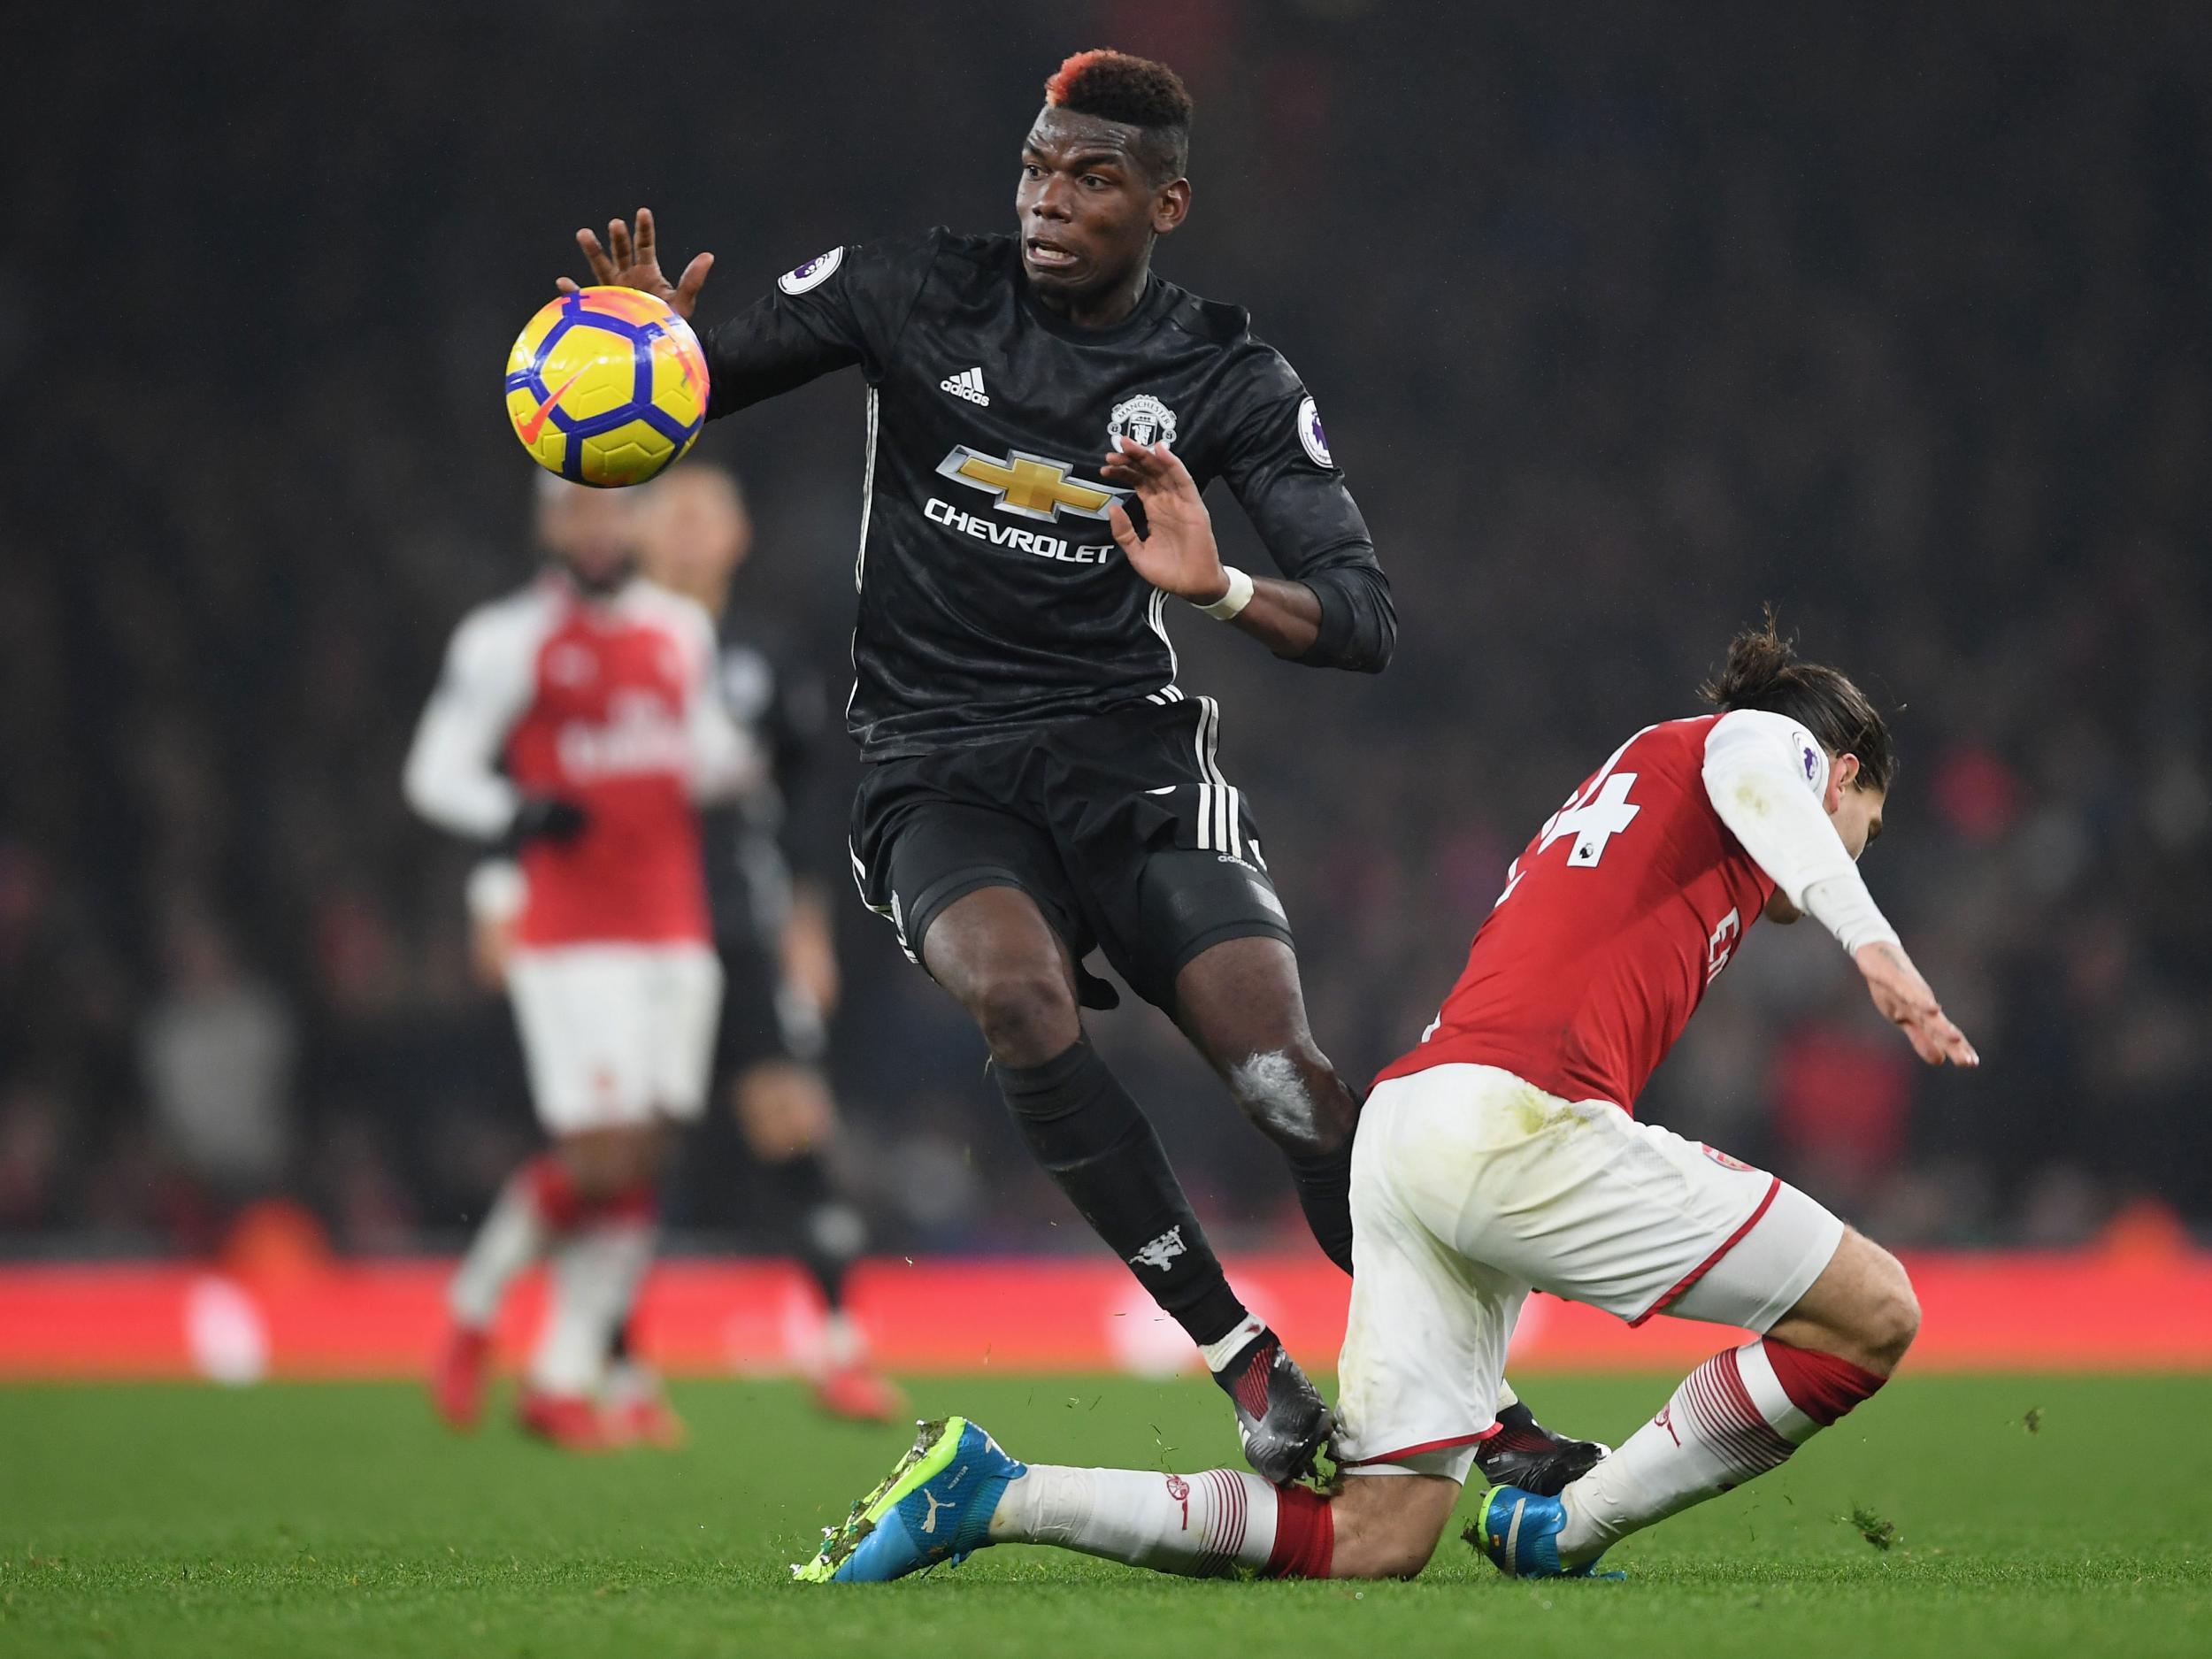 Manchester United midfielder Paul Pogba breaks silence on his red card against Arsenal